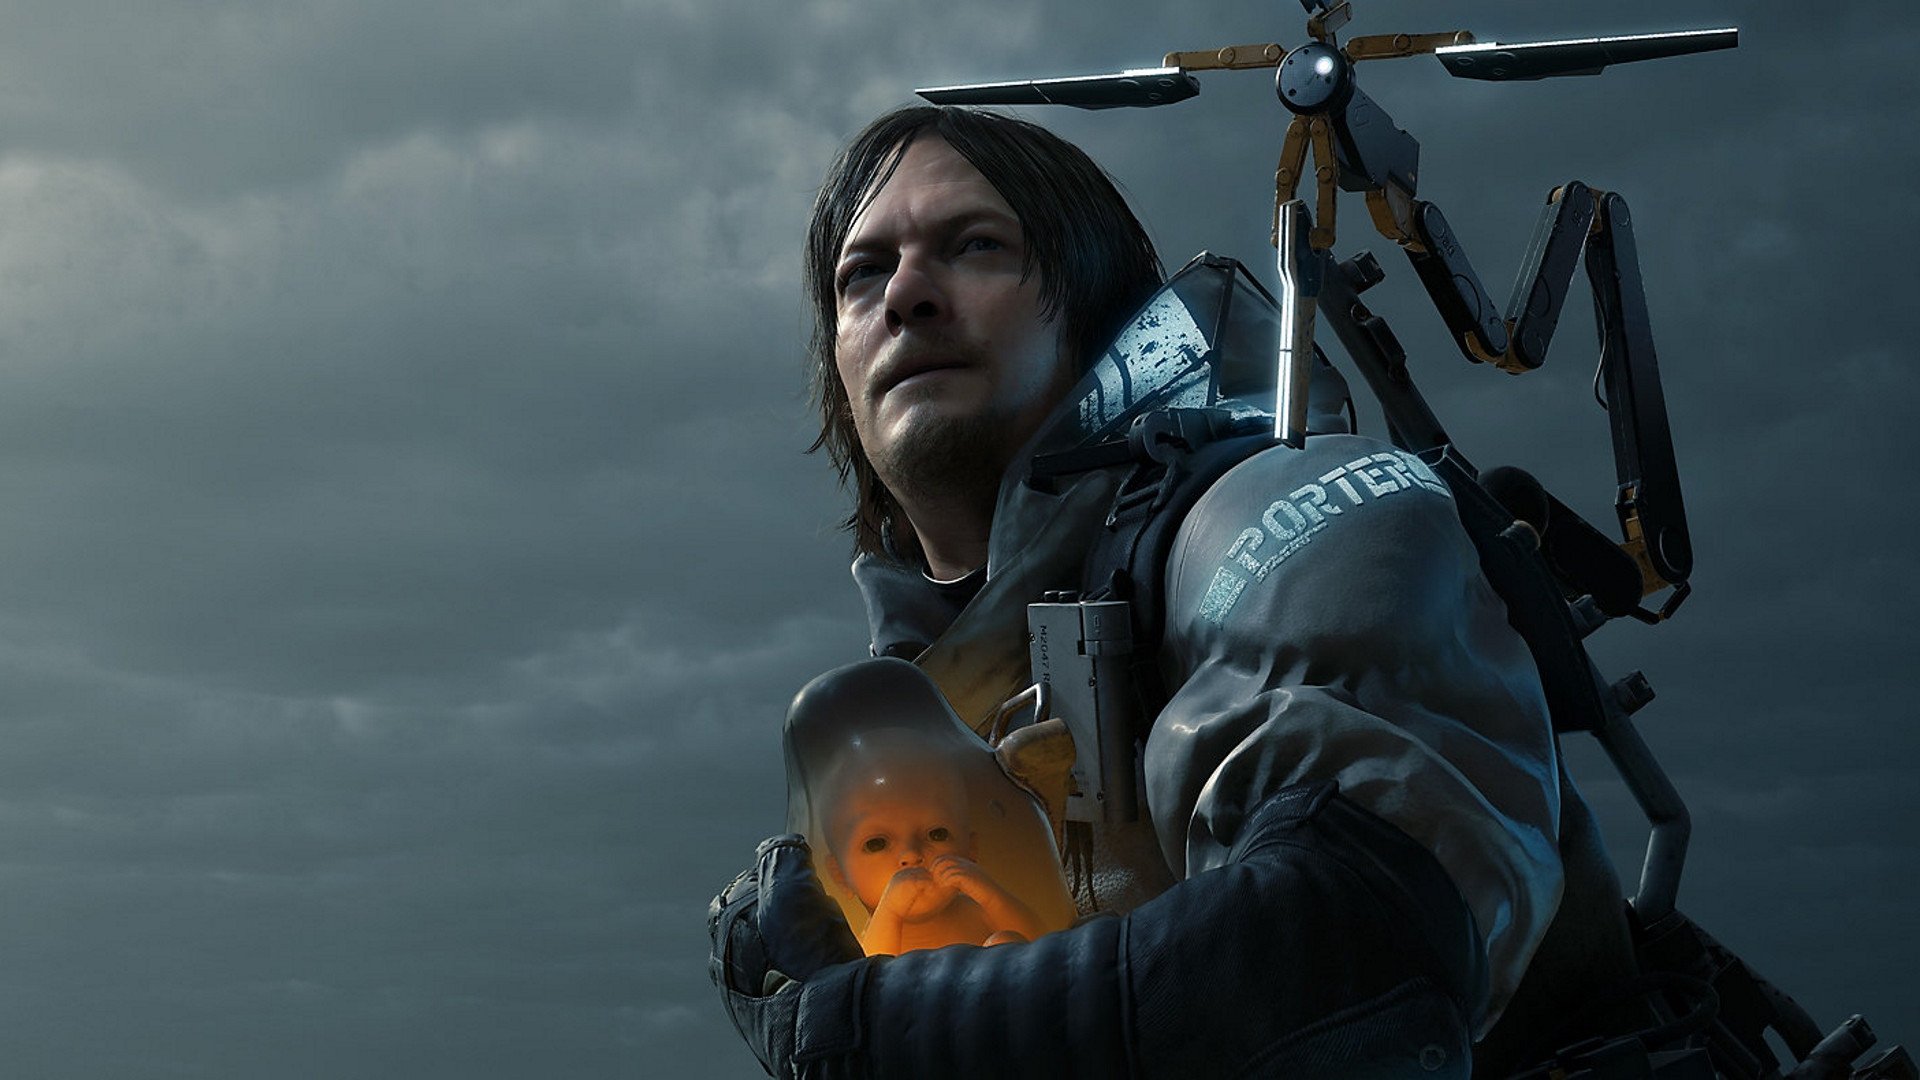 A Death Stranding sequel is reportedly in development